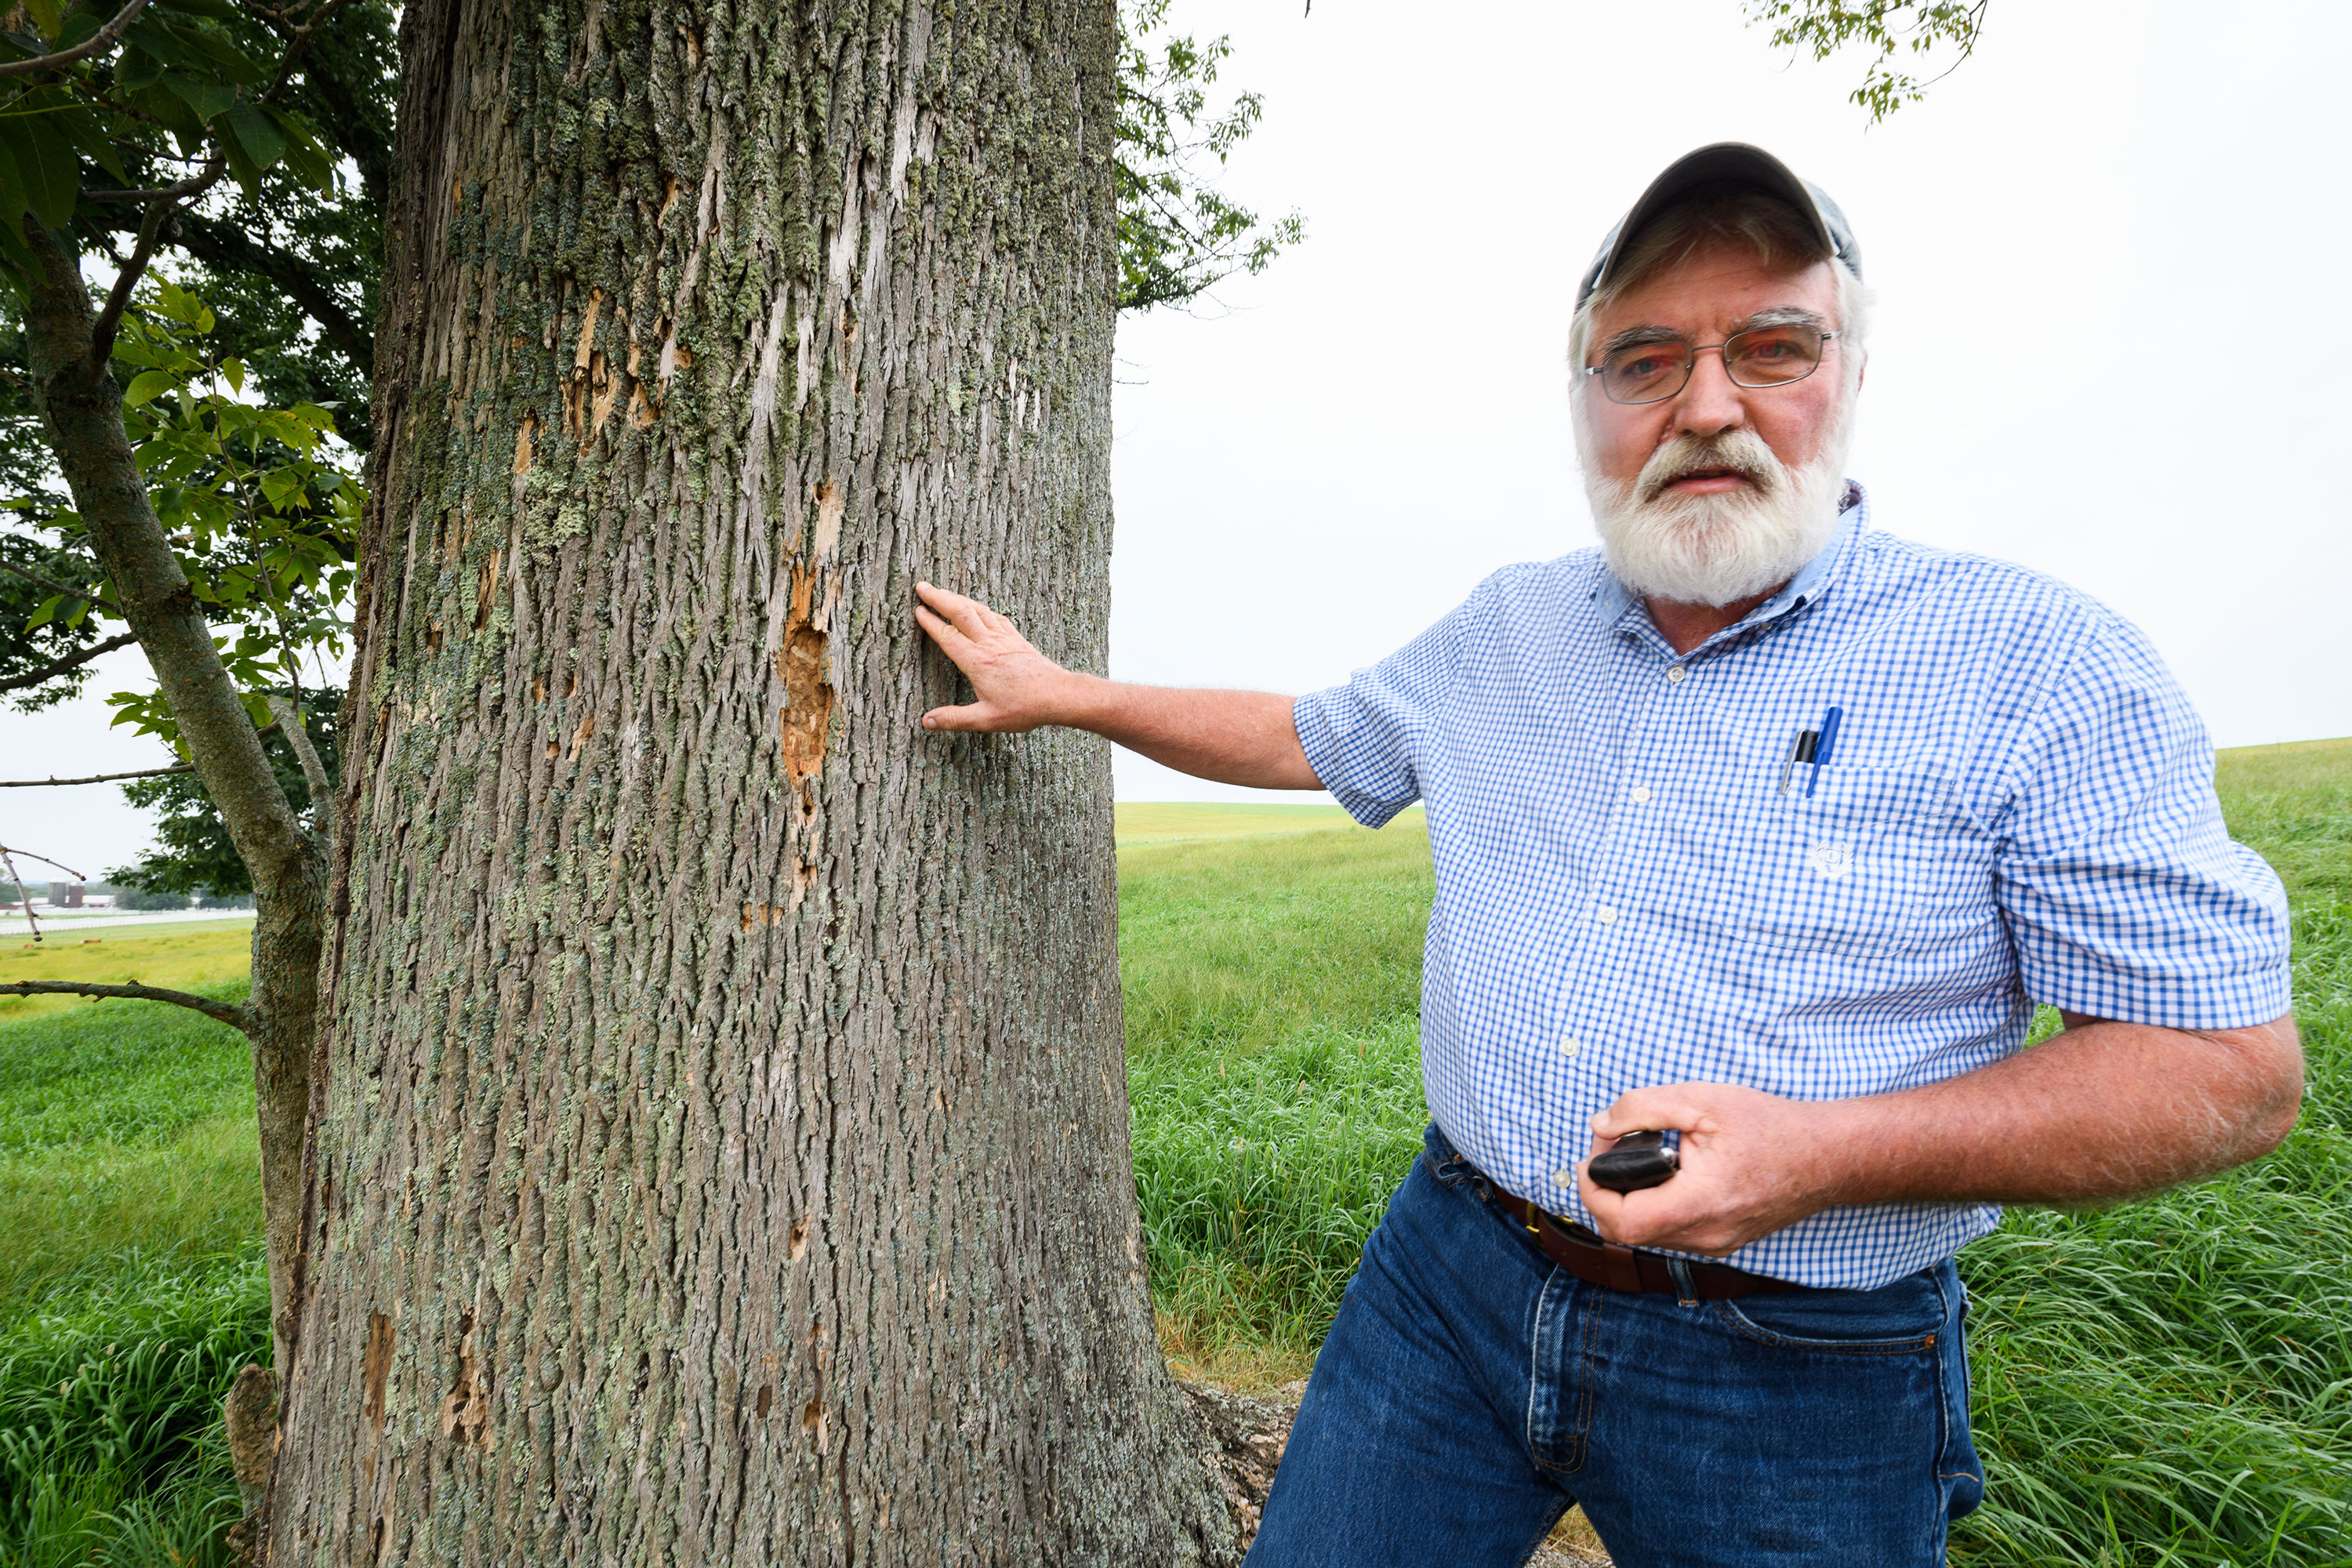 Thomas Worthley, associate extension professor, points out damage caused by emerald ash borers on a tree along Horsebarn Hill Road on Aug. 29, 2017. (Peter Morenus/UConn Photo)